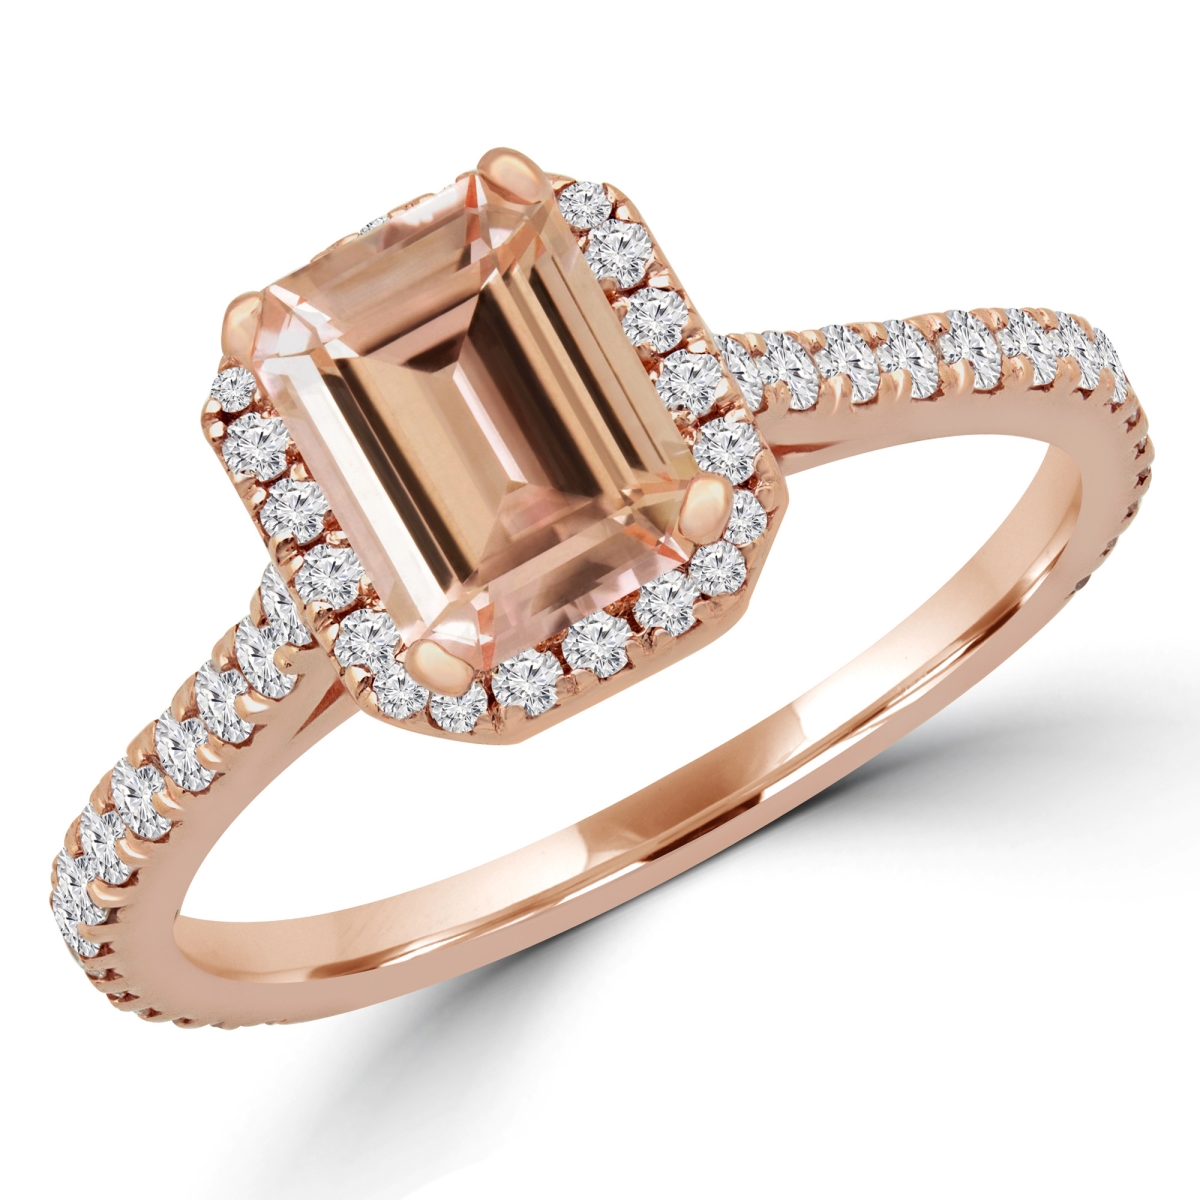 Picture of Majesty Diamonds MD180580-5.25 1.25 CTW Emerald Pink Morganite Halo Engagement Ring in 14K Rose Gold - Size 5.25